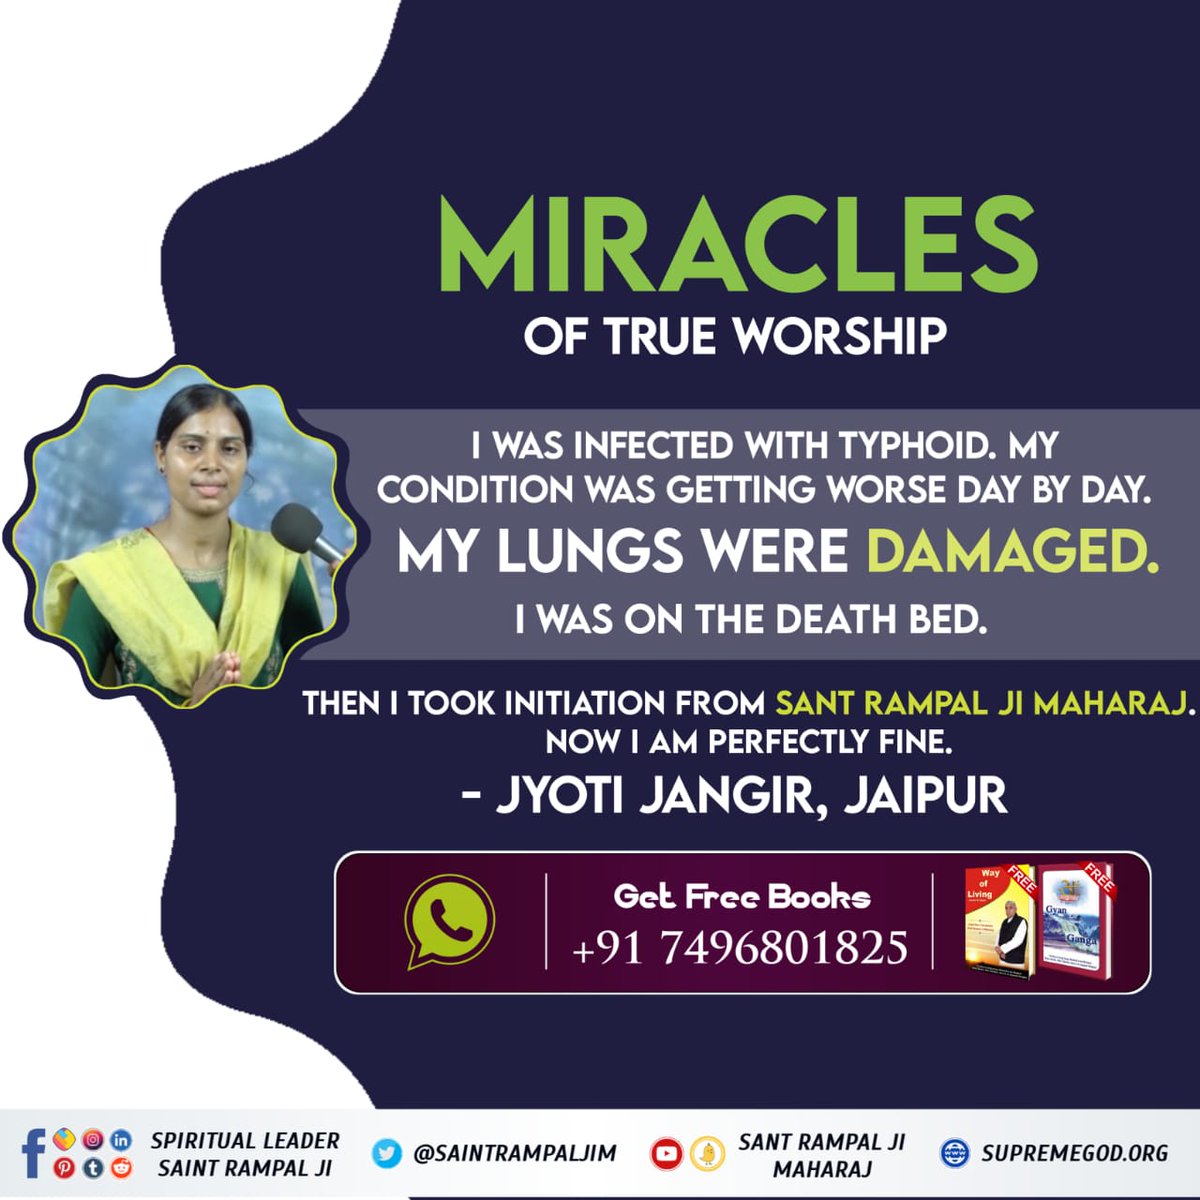 #GodNightWednesday #Facts_About_EasterSunday I WAS INFECTED WITH TYPHOID. MY CONDITION WAS GETTING WORSE DAY BY DAY. MY LUNGS WERE DAMAGED. I WAS ON THE DEATH BED. THEN I TOOK INITIATION FROM SANT RAMPAL JI MAHARAJ. NOW I AM PERFECTLY FINE. - JYOTI JANGIR, JAIPUR